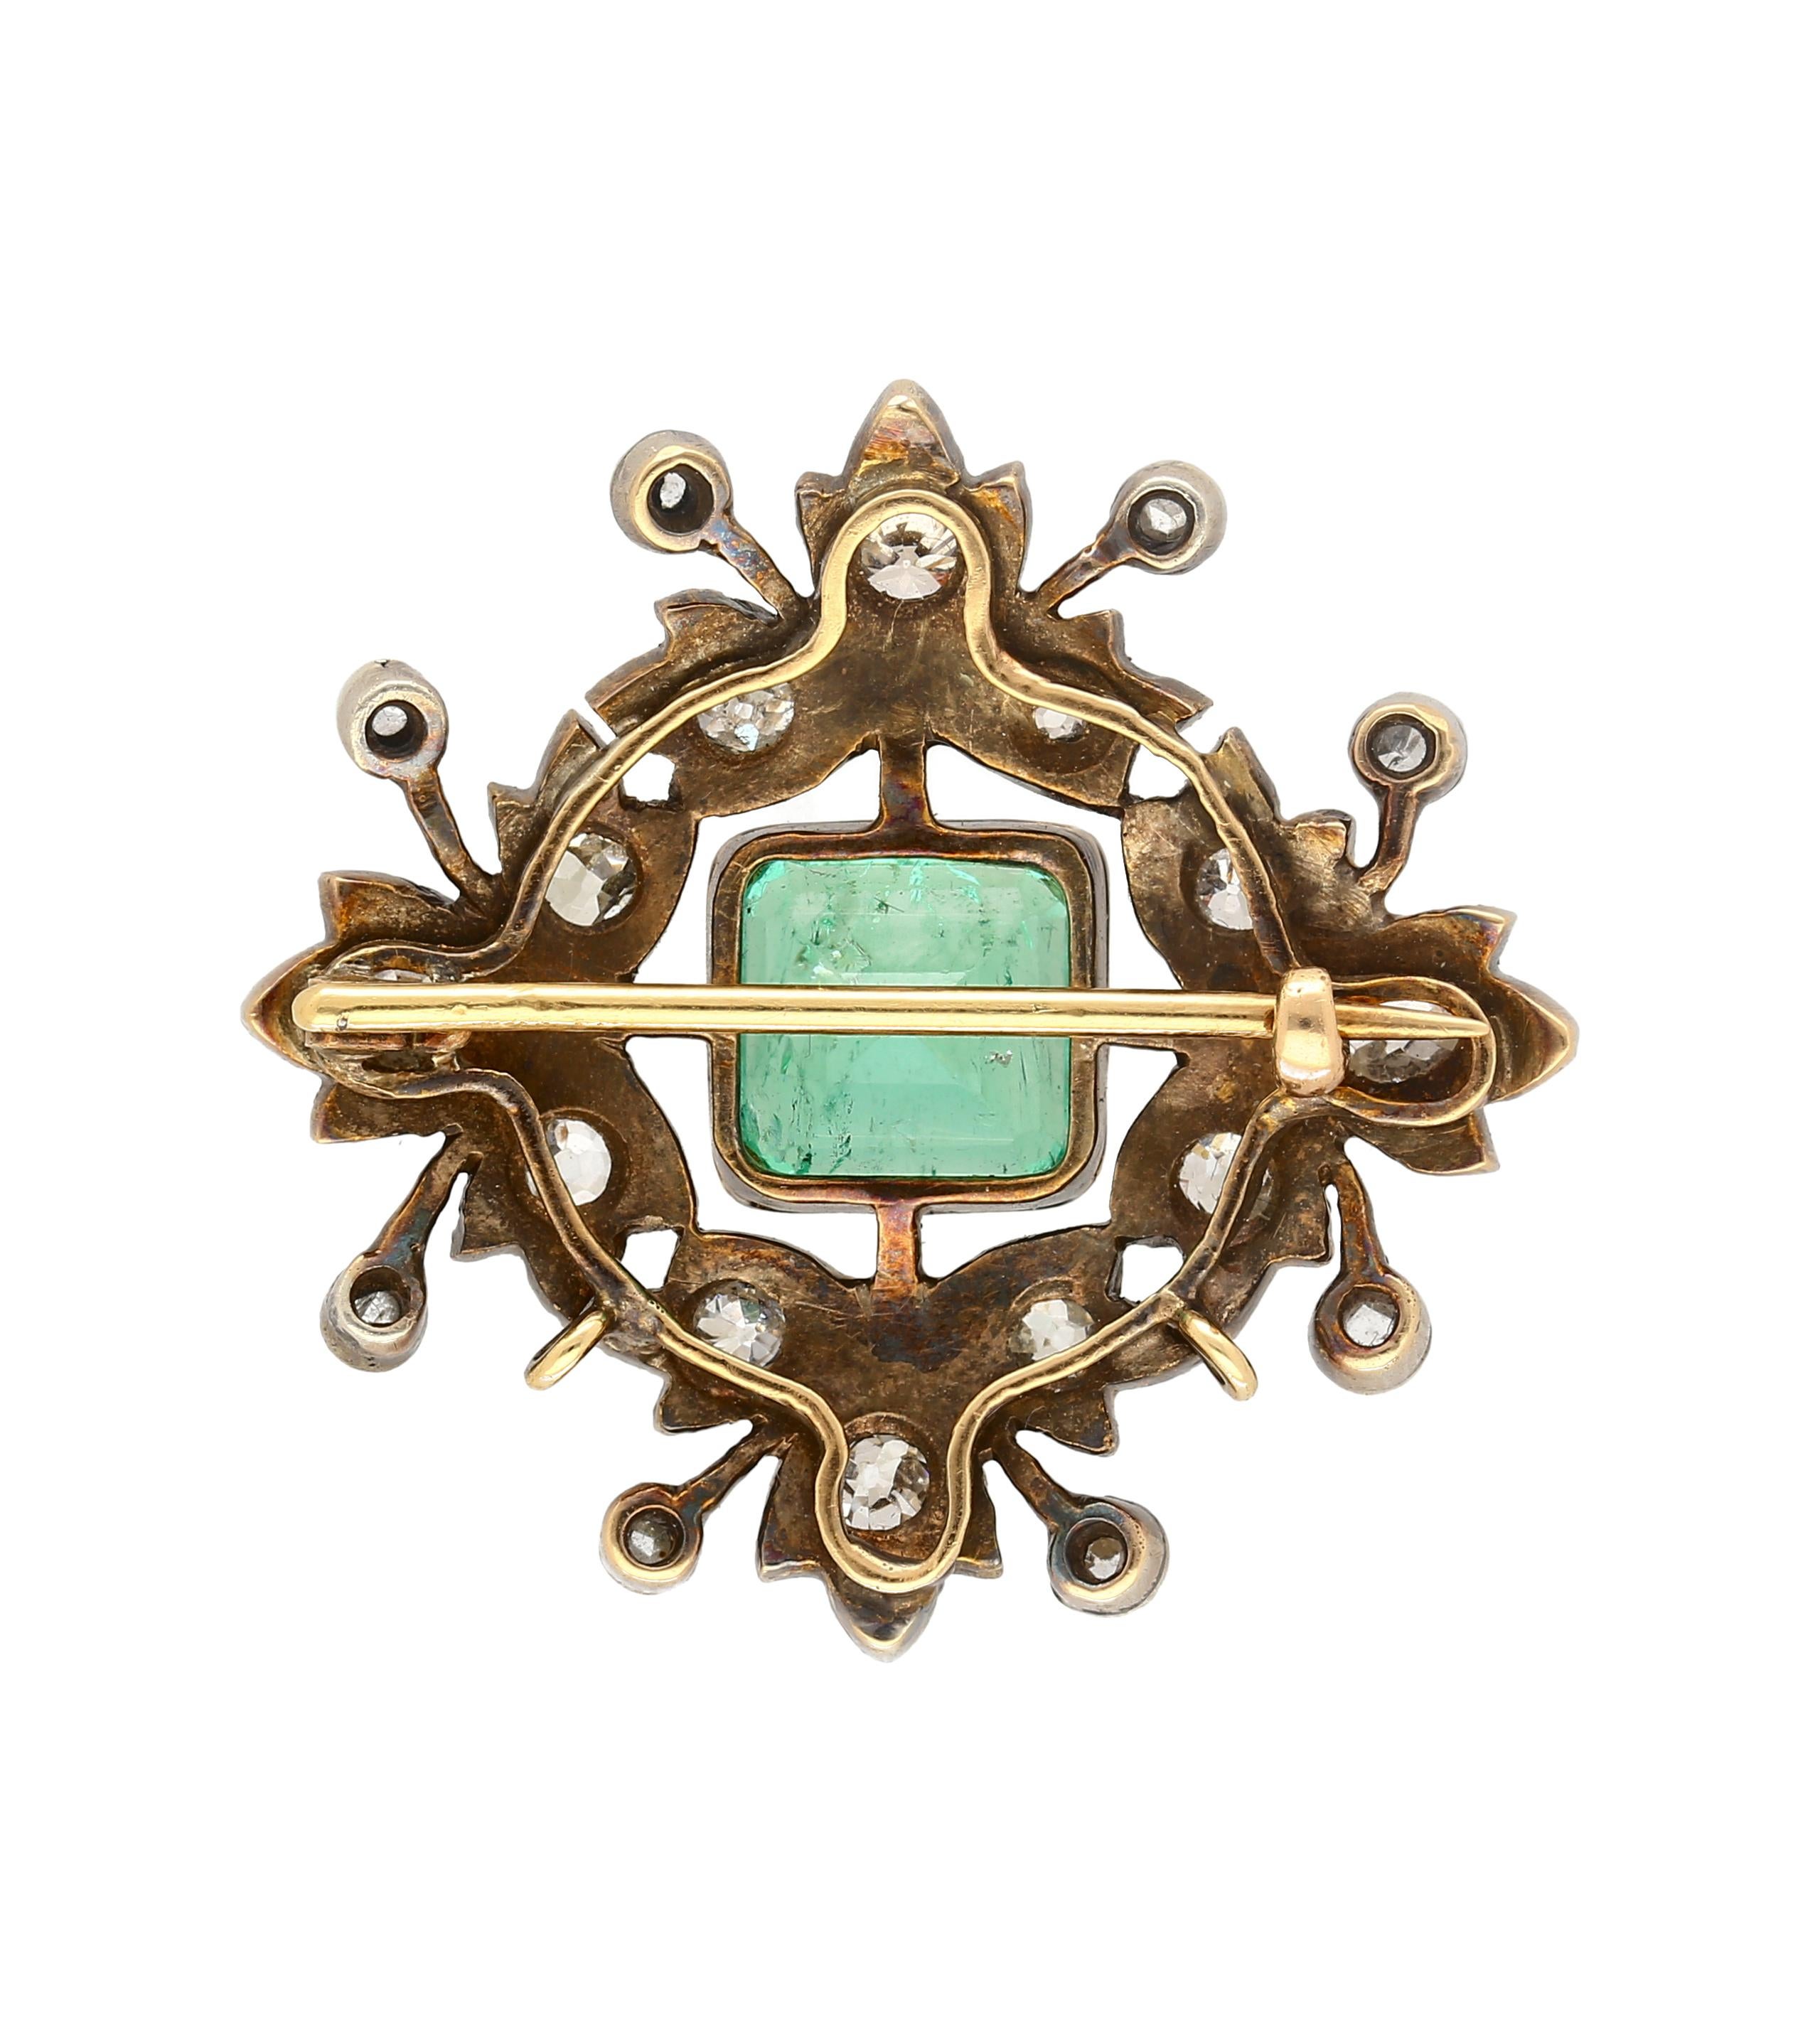 AGL certified emerald brooch, crafted from silver and gold with a weight of 8.12 grams. The centerpiece boasts a bezel set 3.12 Carat No oil cushion square cut natural Colombian Emerald, with origins from Colombia. Adorned by 20 Old European cut